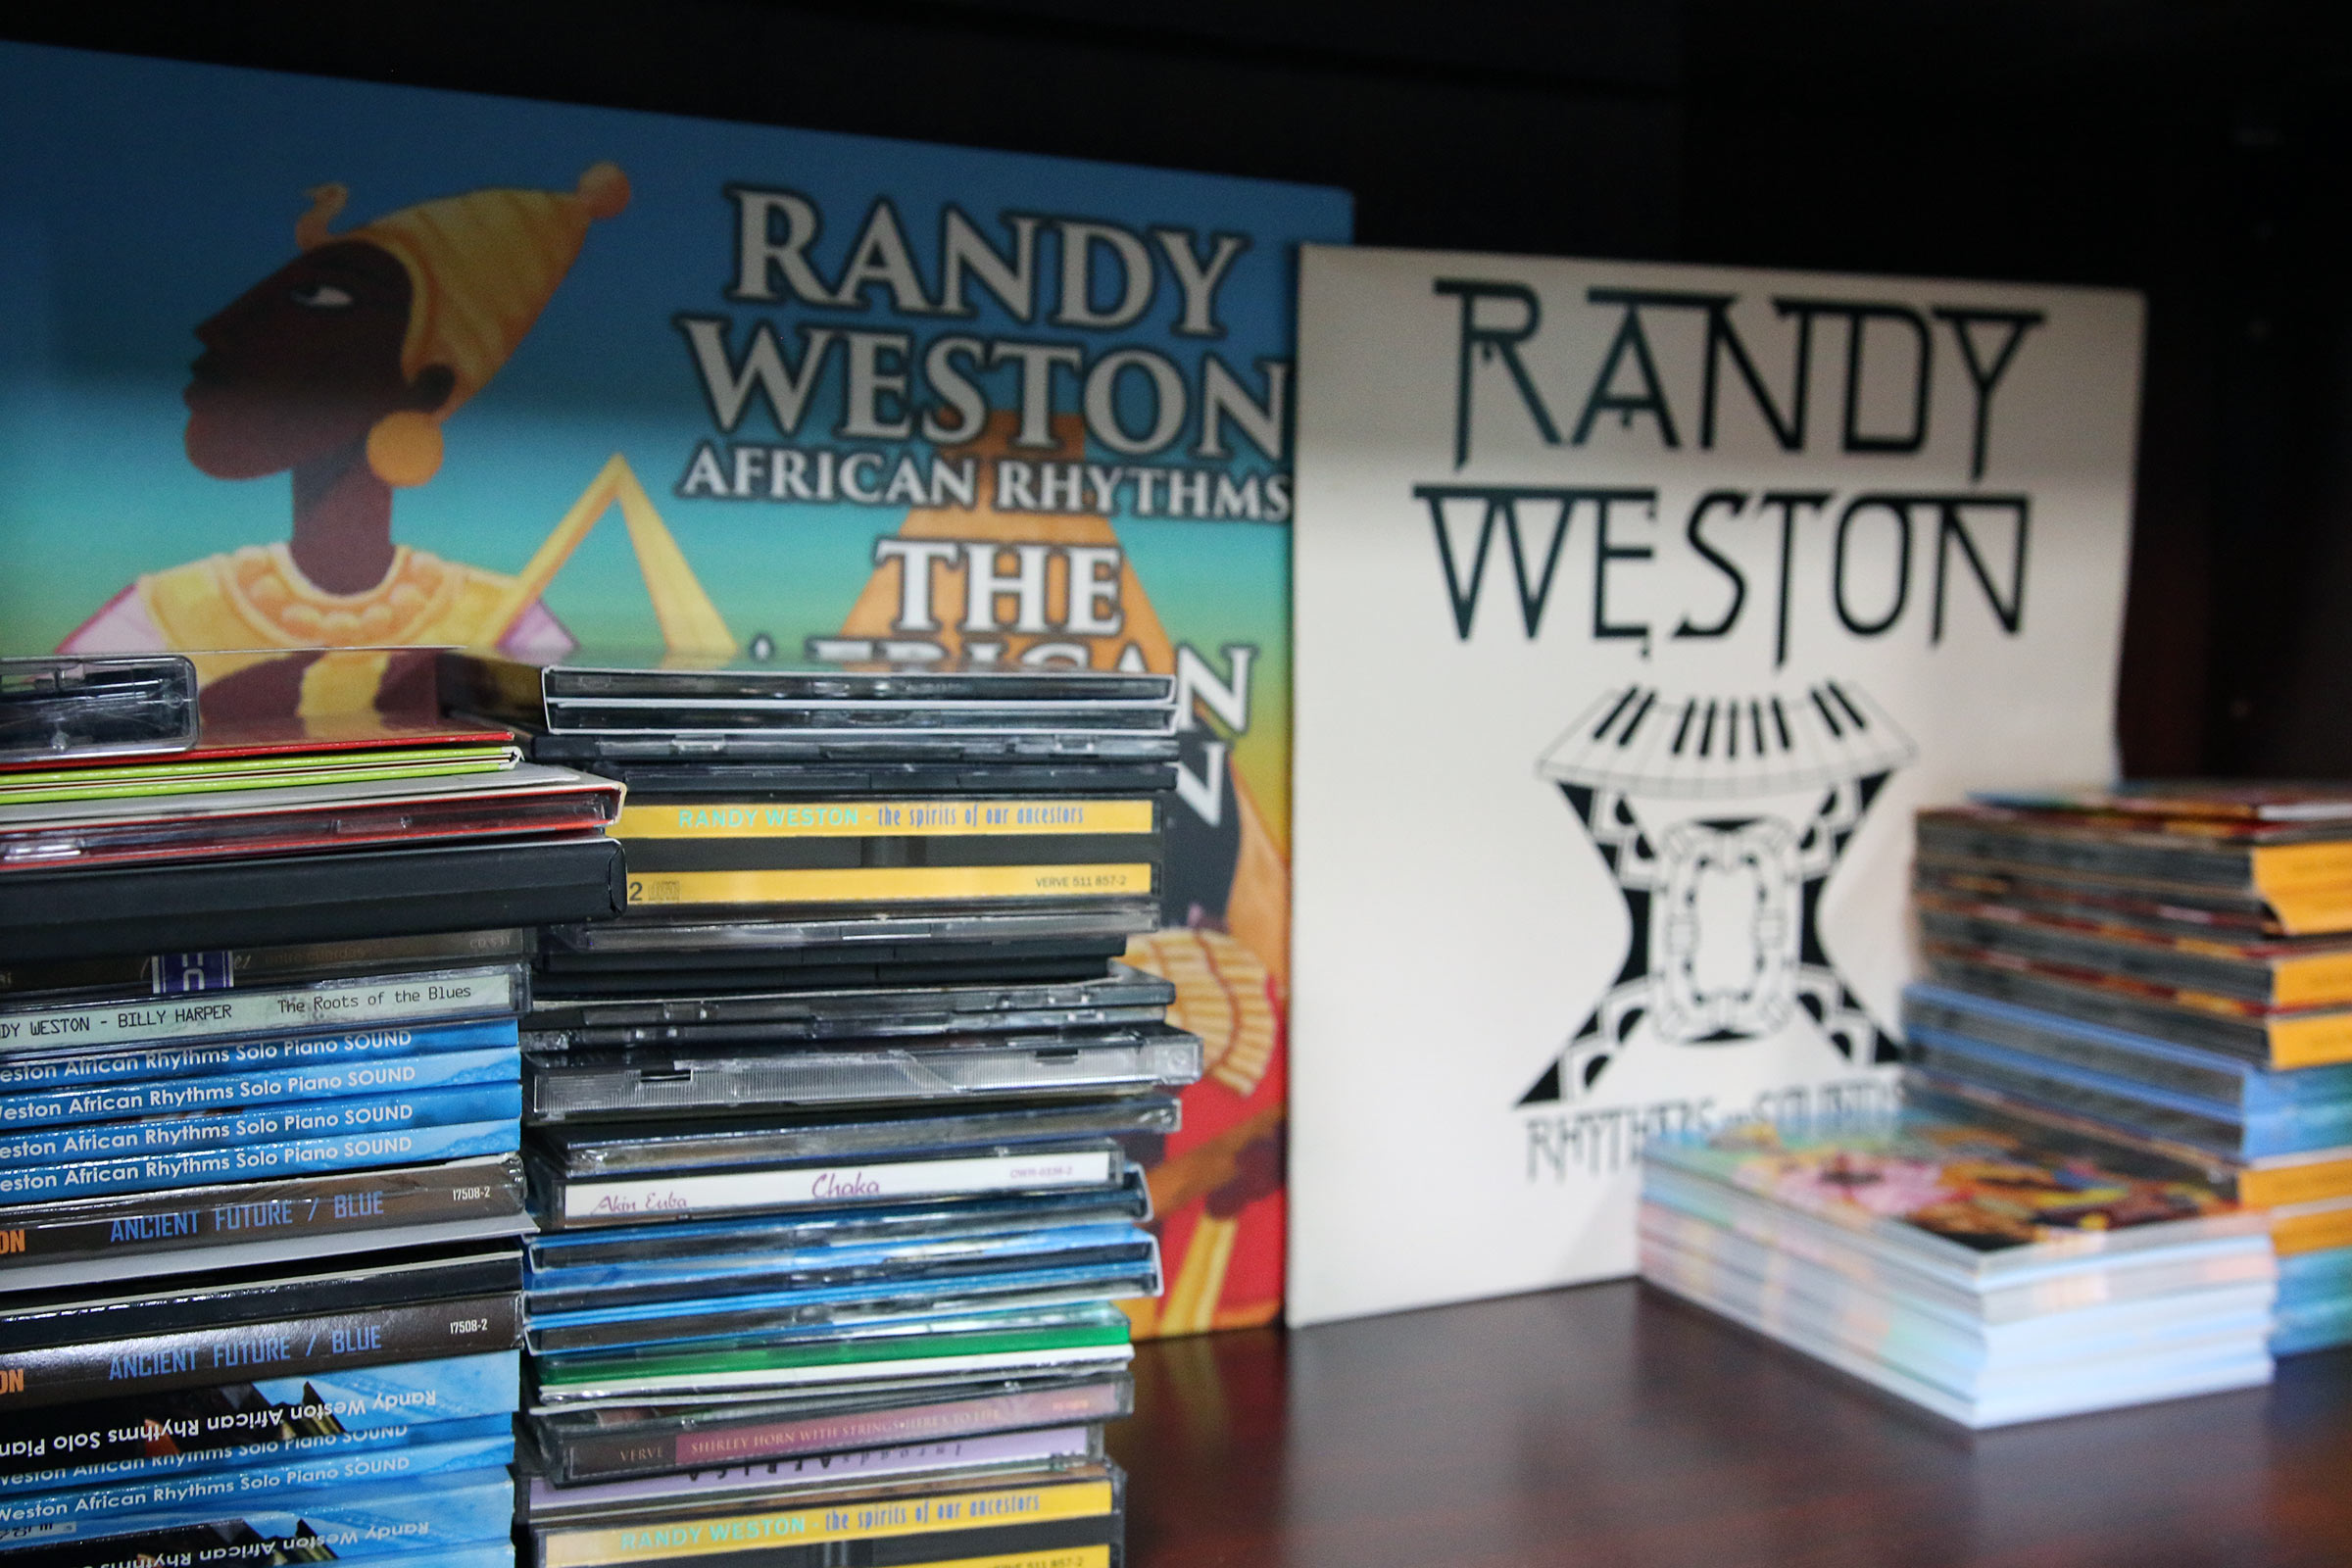 Some LPs of Randy Weston's music as well as piles of his CDs.